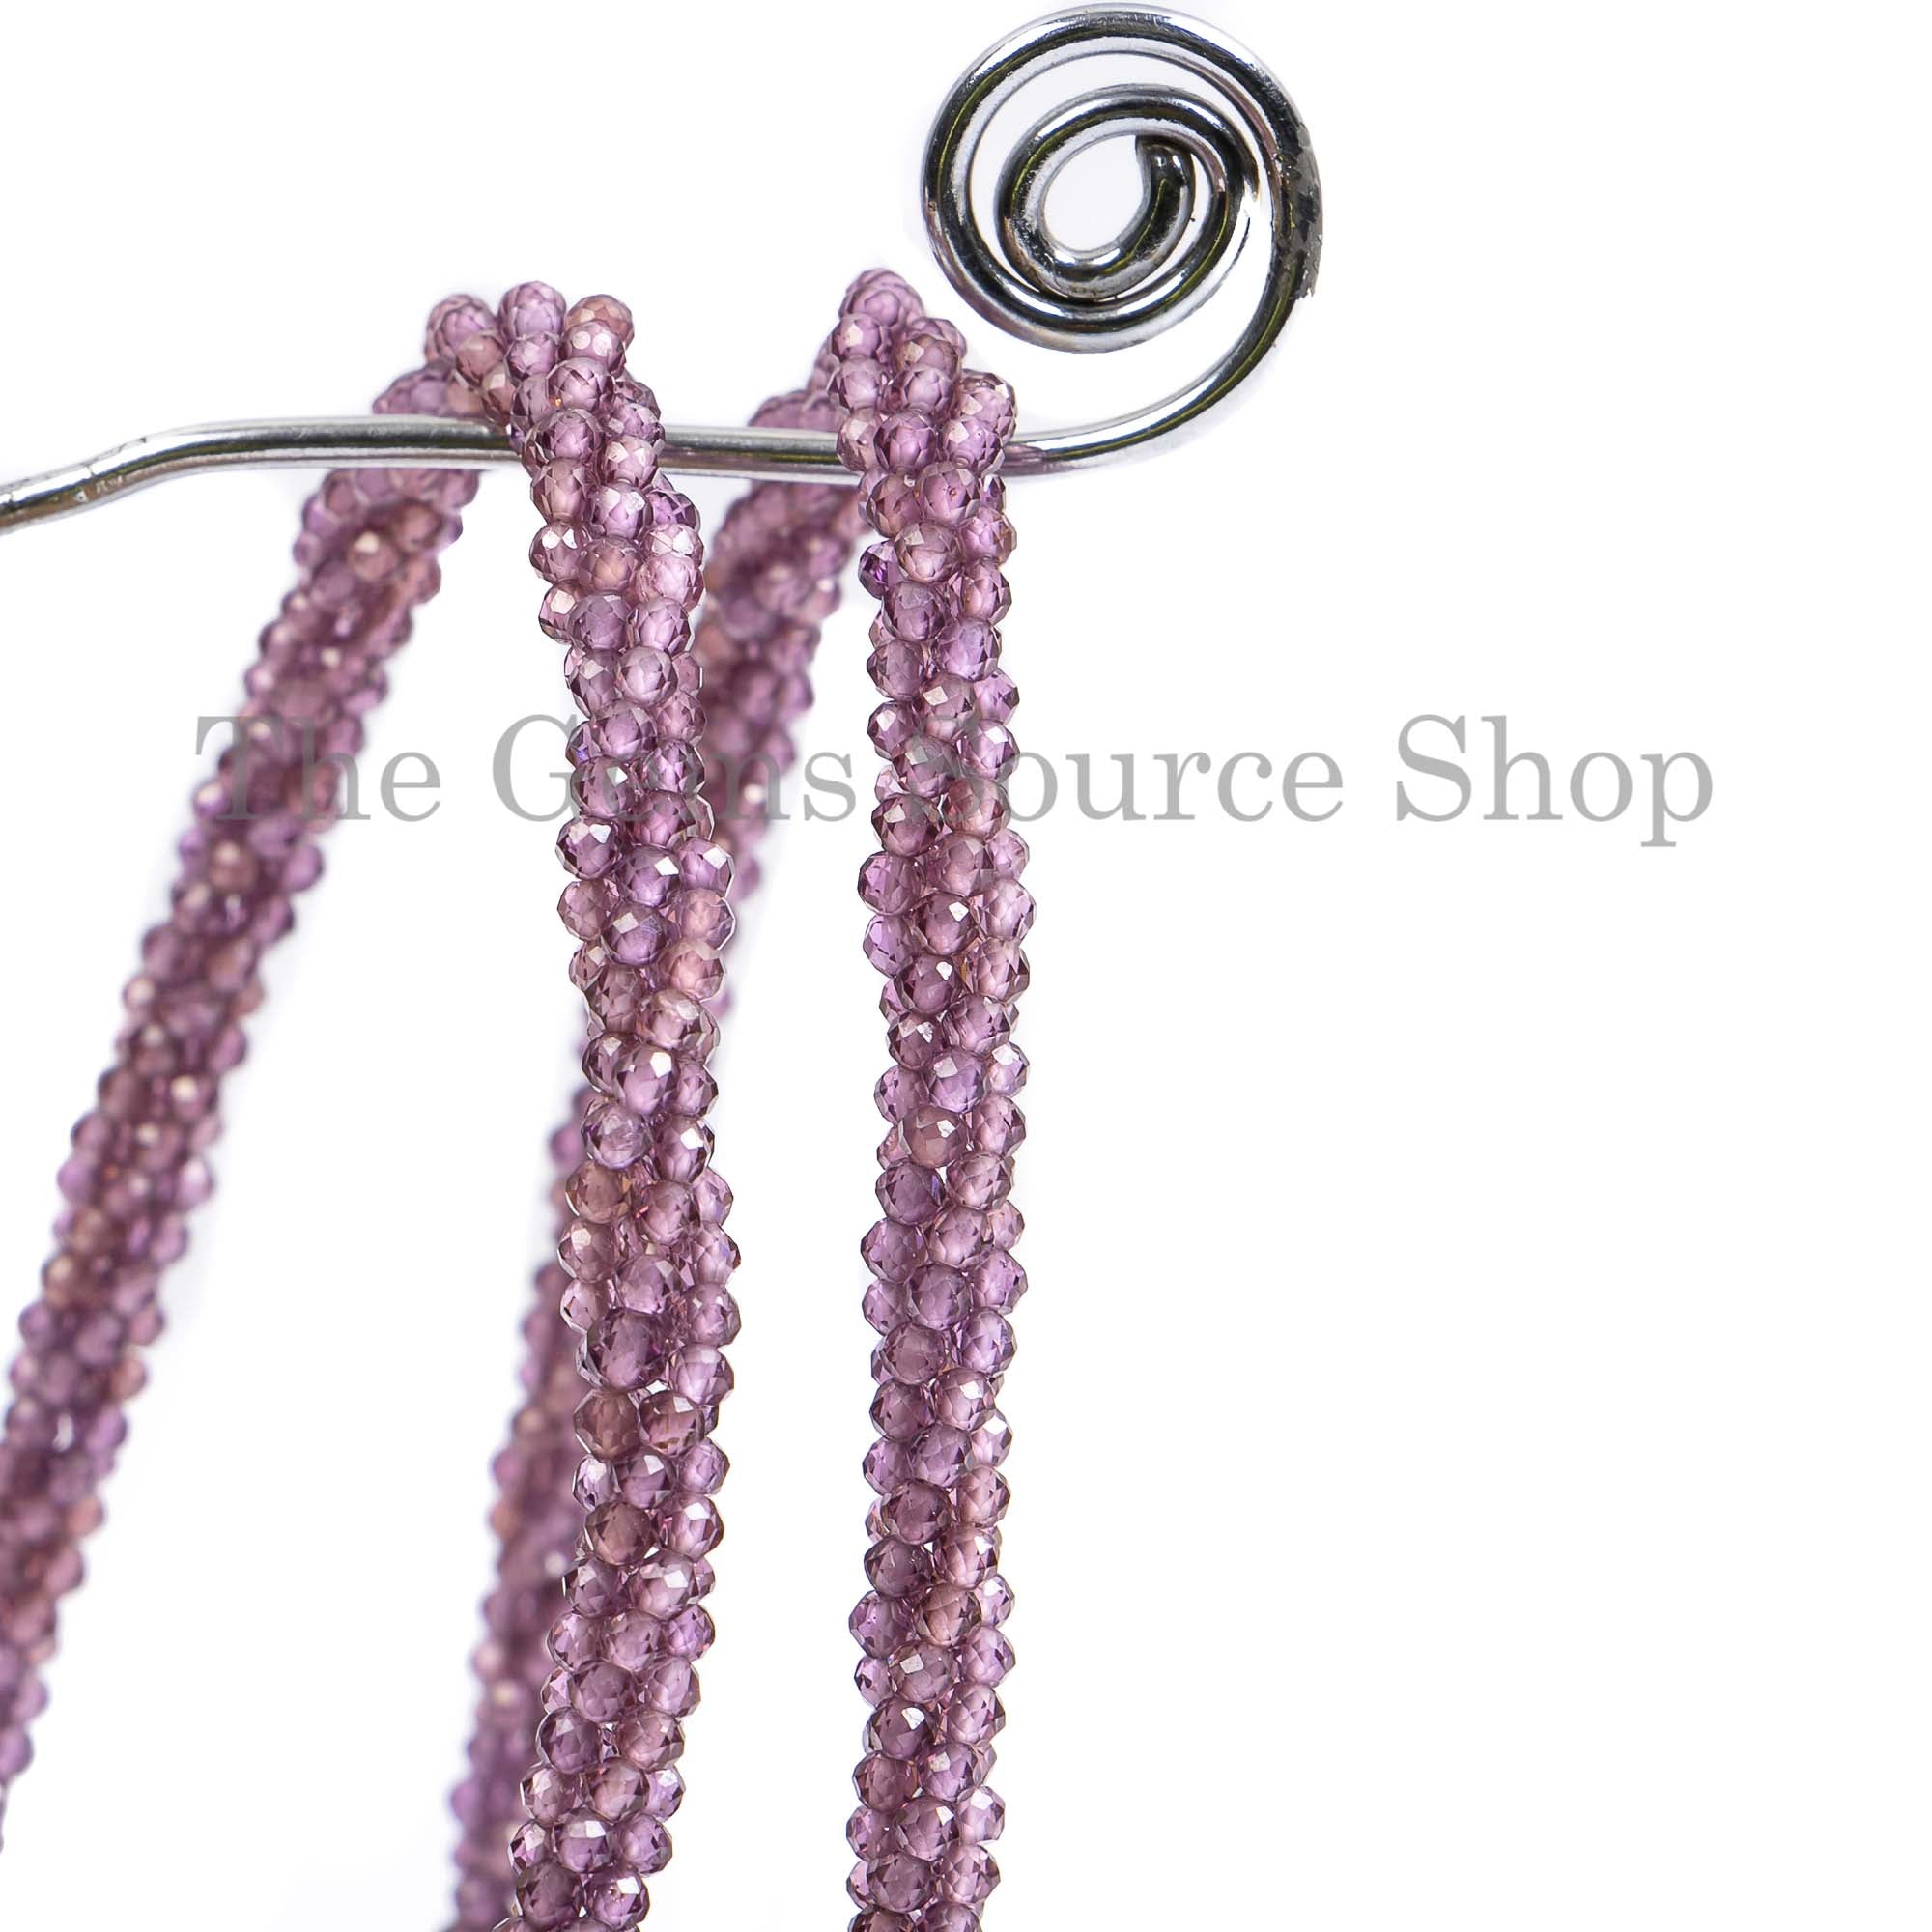 Rhodolite Garnet Beads Necklace, Faceted Rondelle Beads Necklace, Wholesale Beaded Jewelry